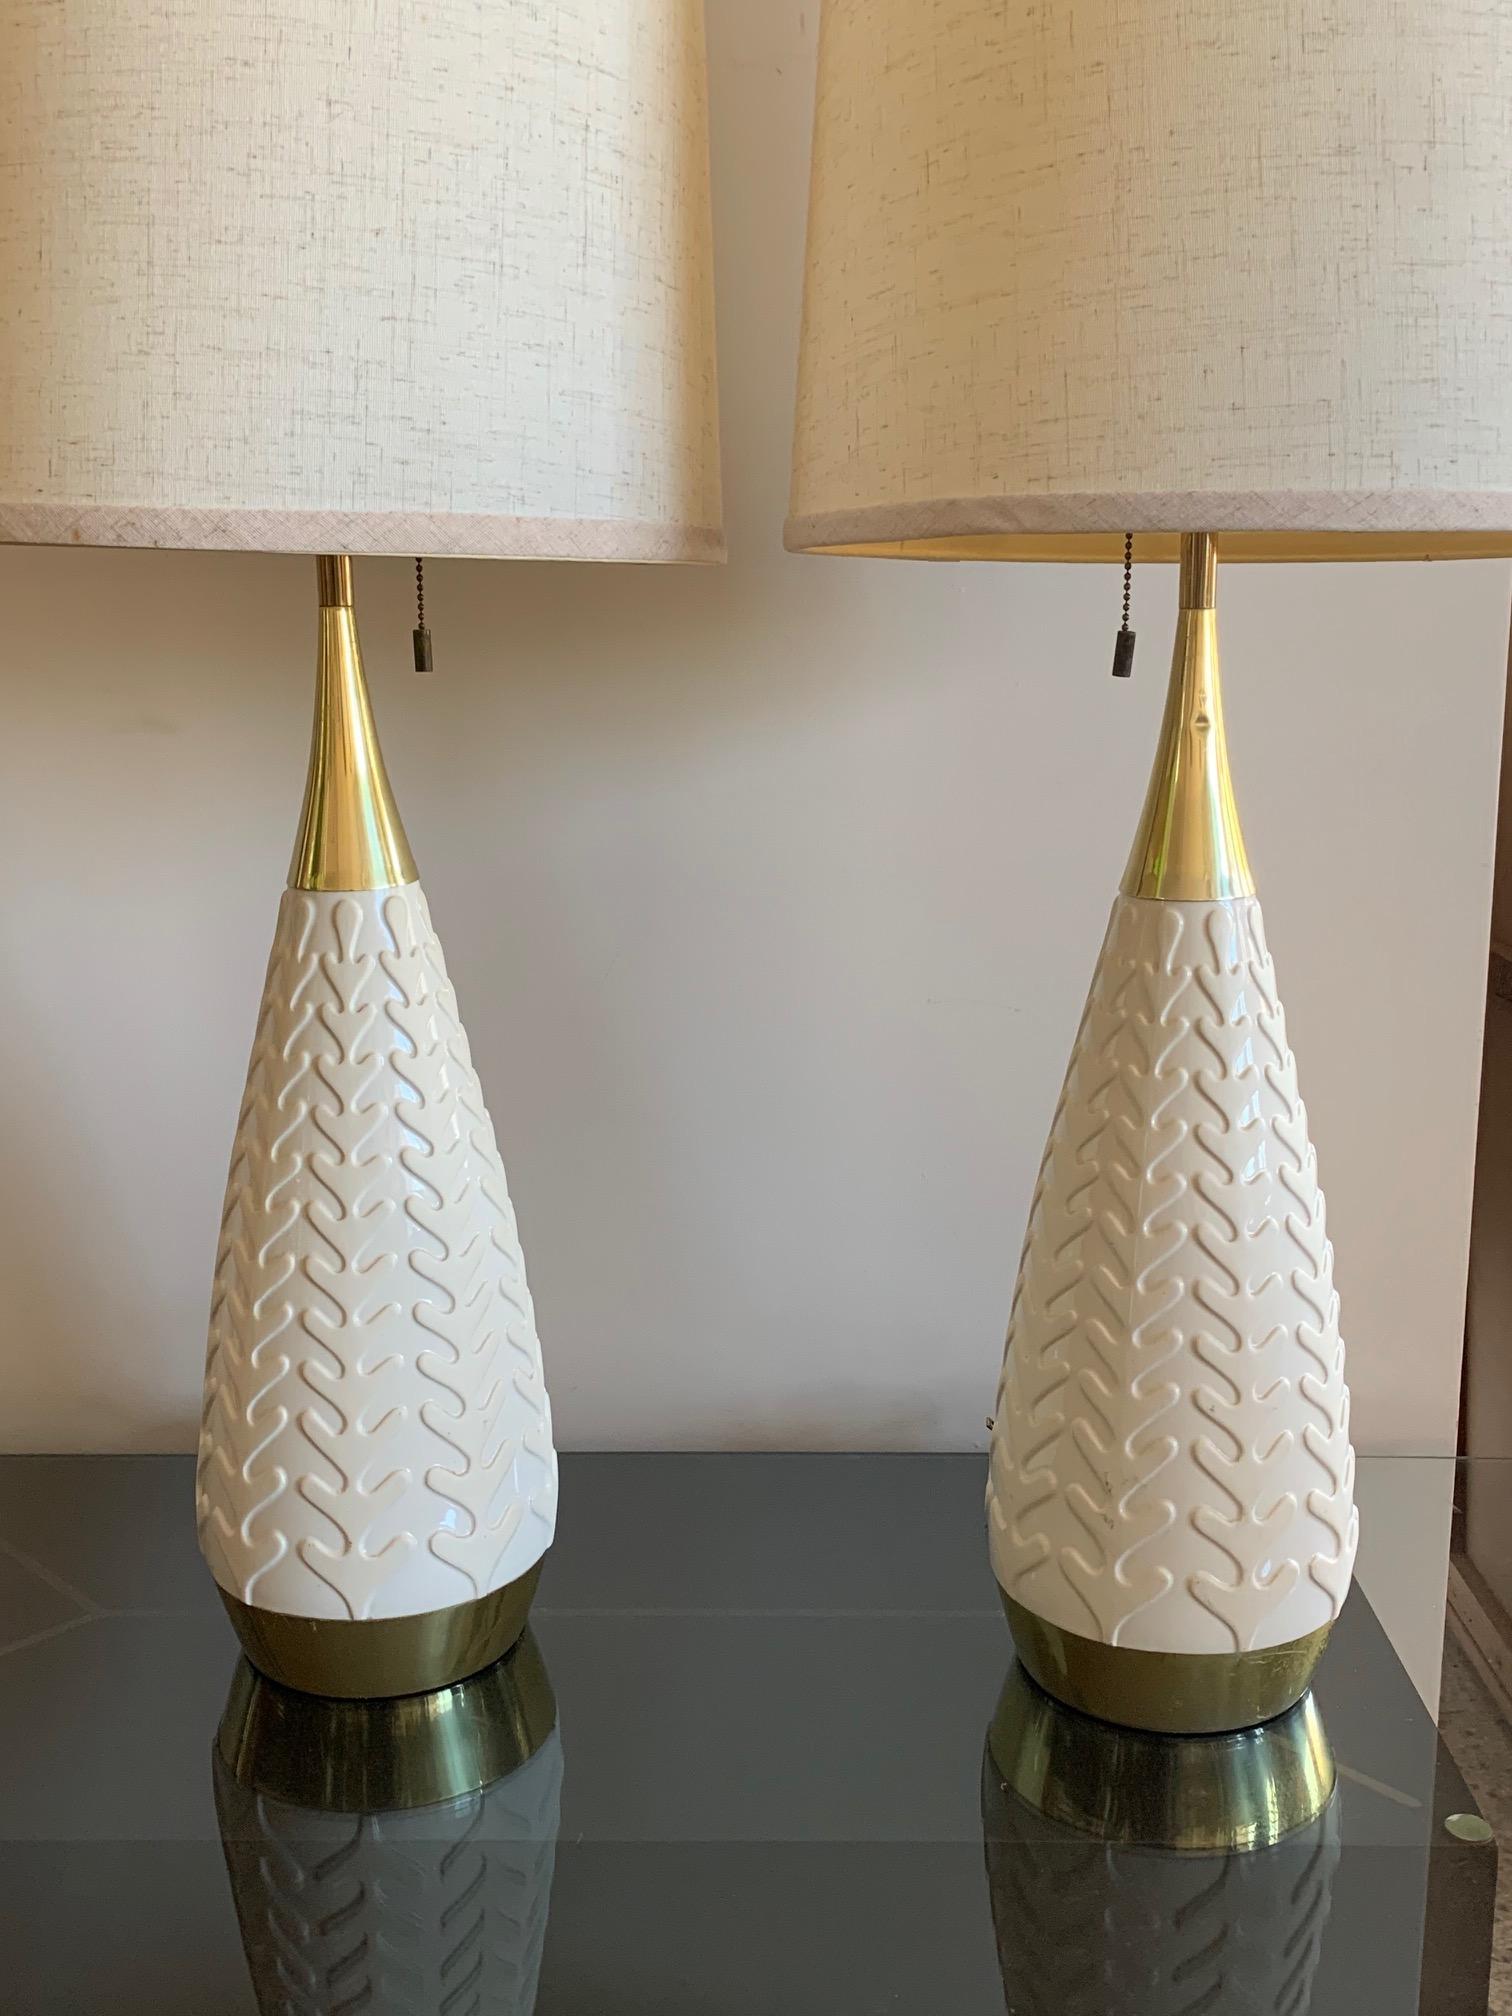 A pair of unusual Gerald Thurston/Lightolier table lamps. Ceramic with decorative pattern, three way bulb switch, polished brass.